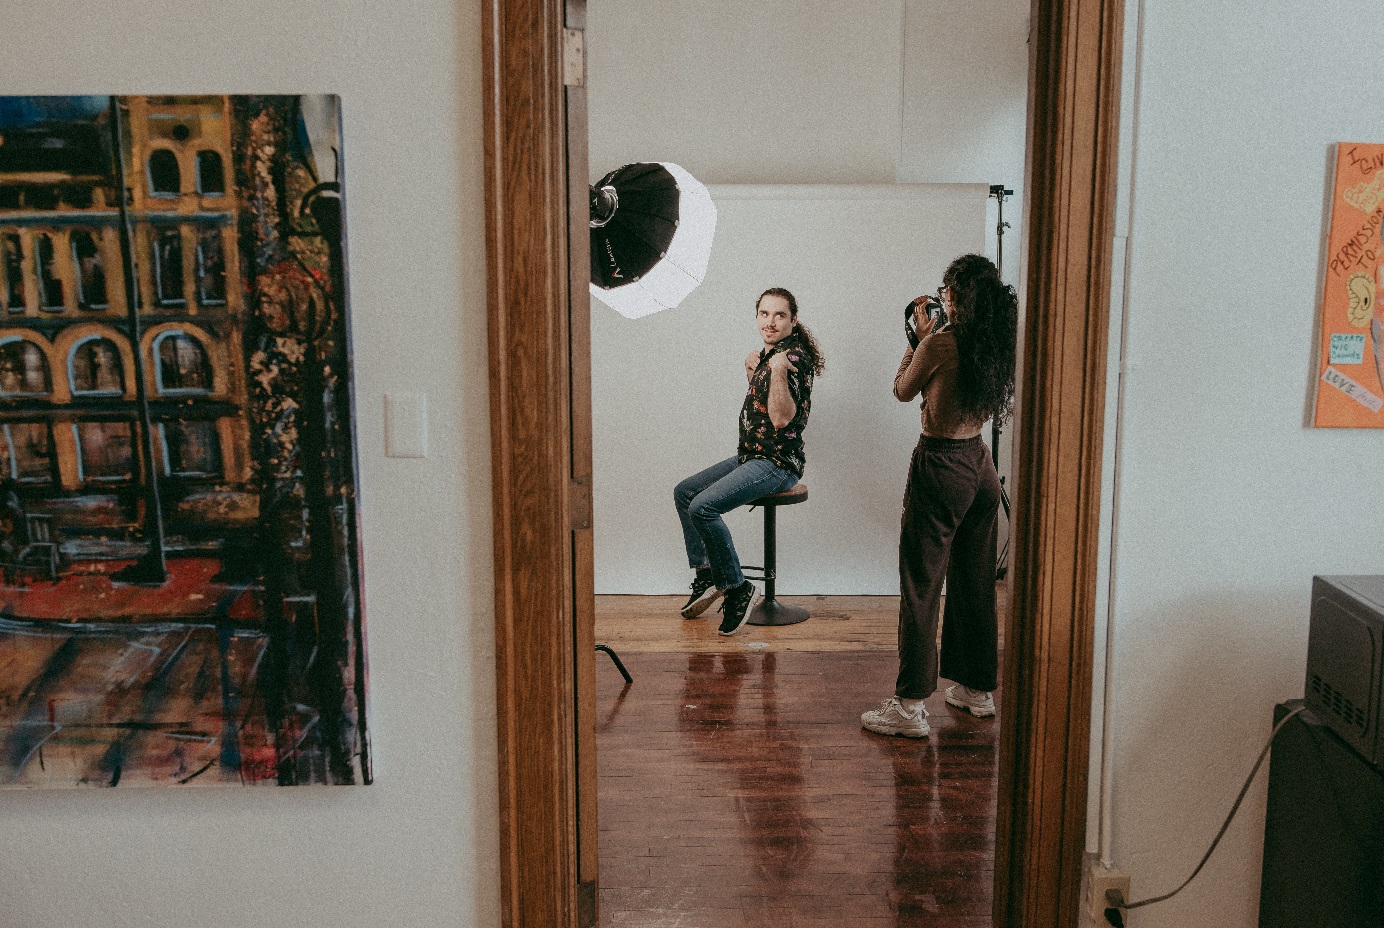 A woman stands inside of a doorway taking a photo of a person sitting on a stool.